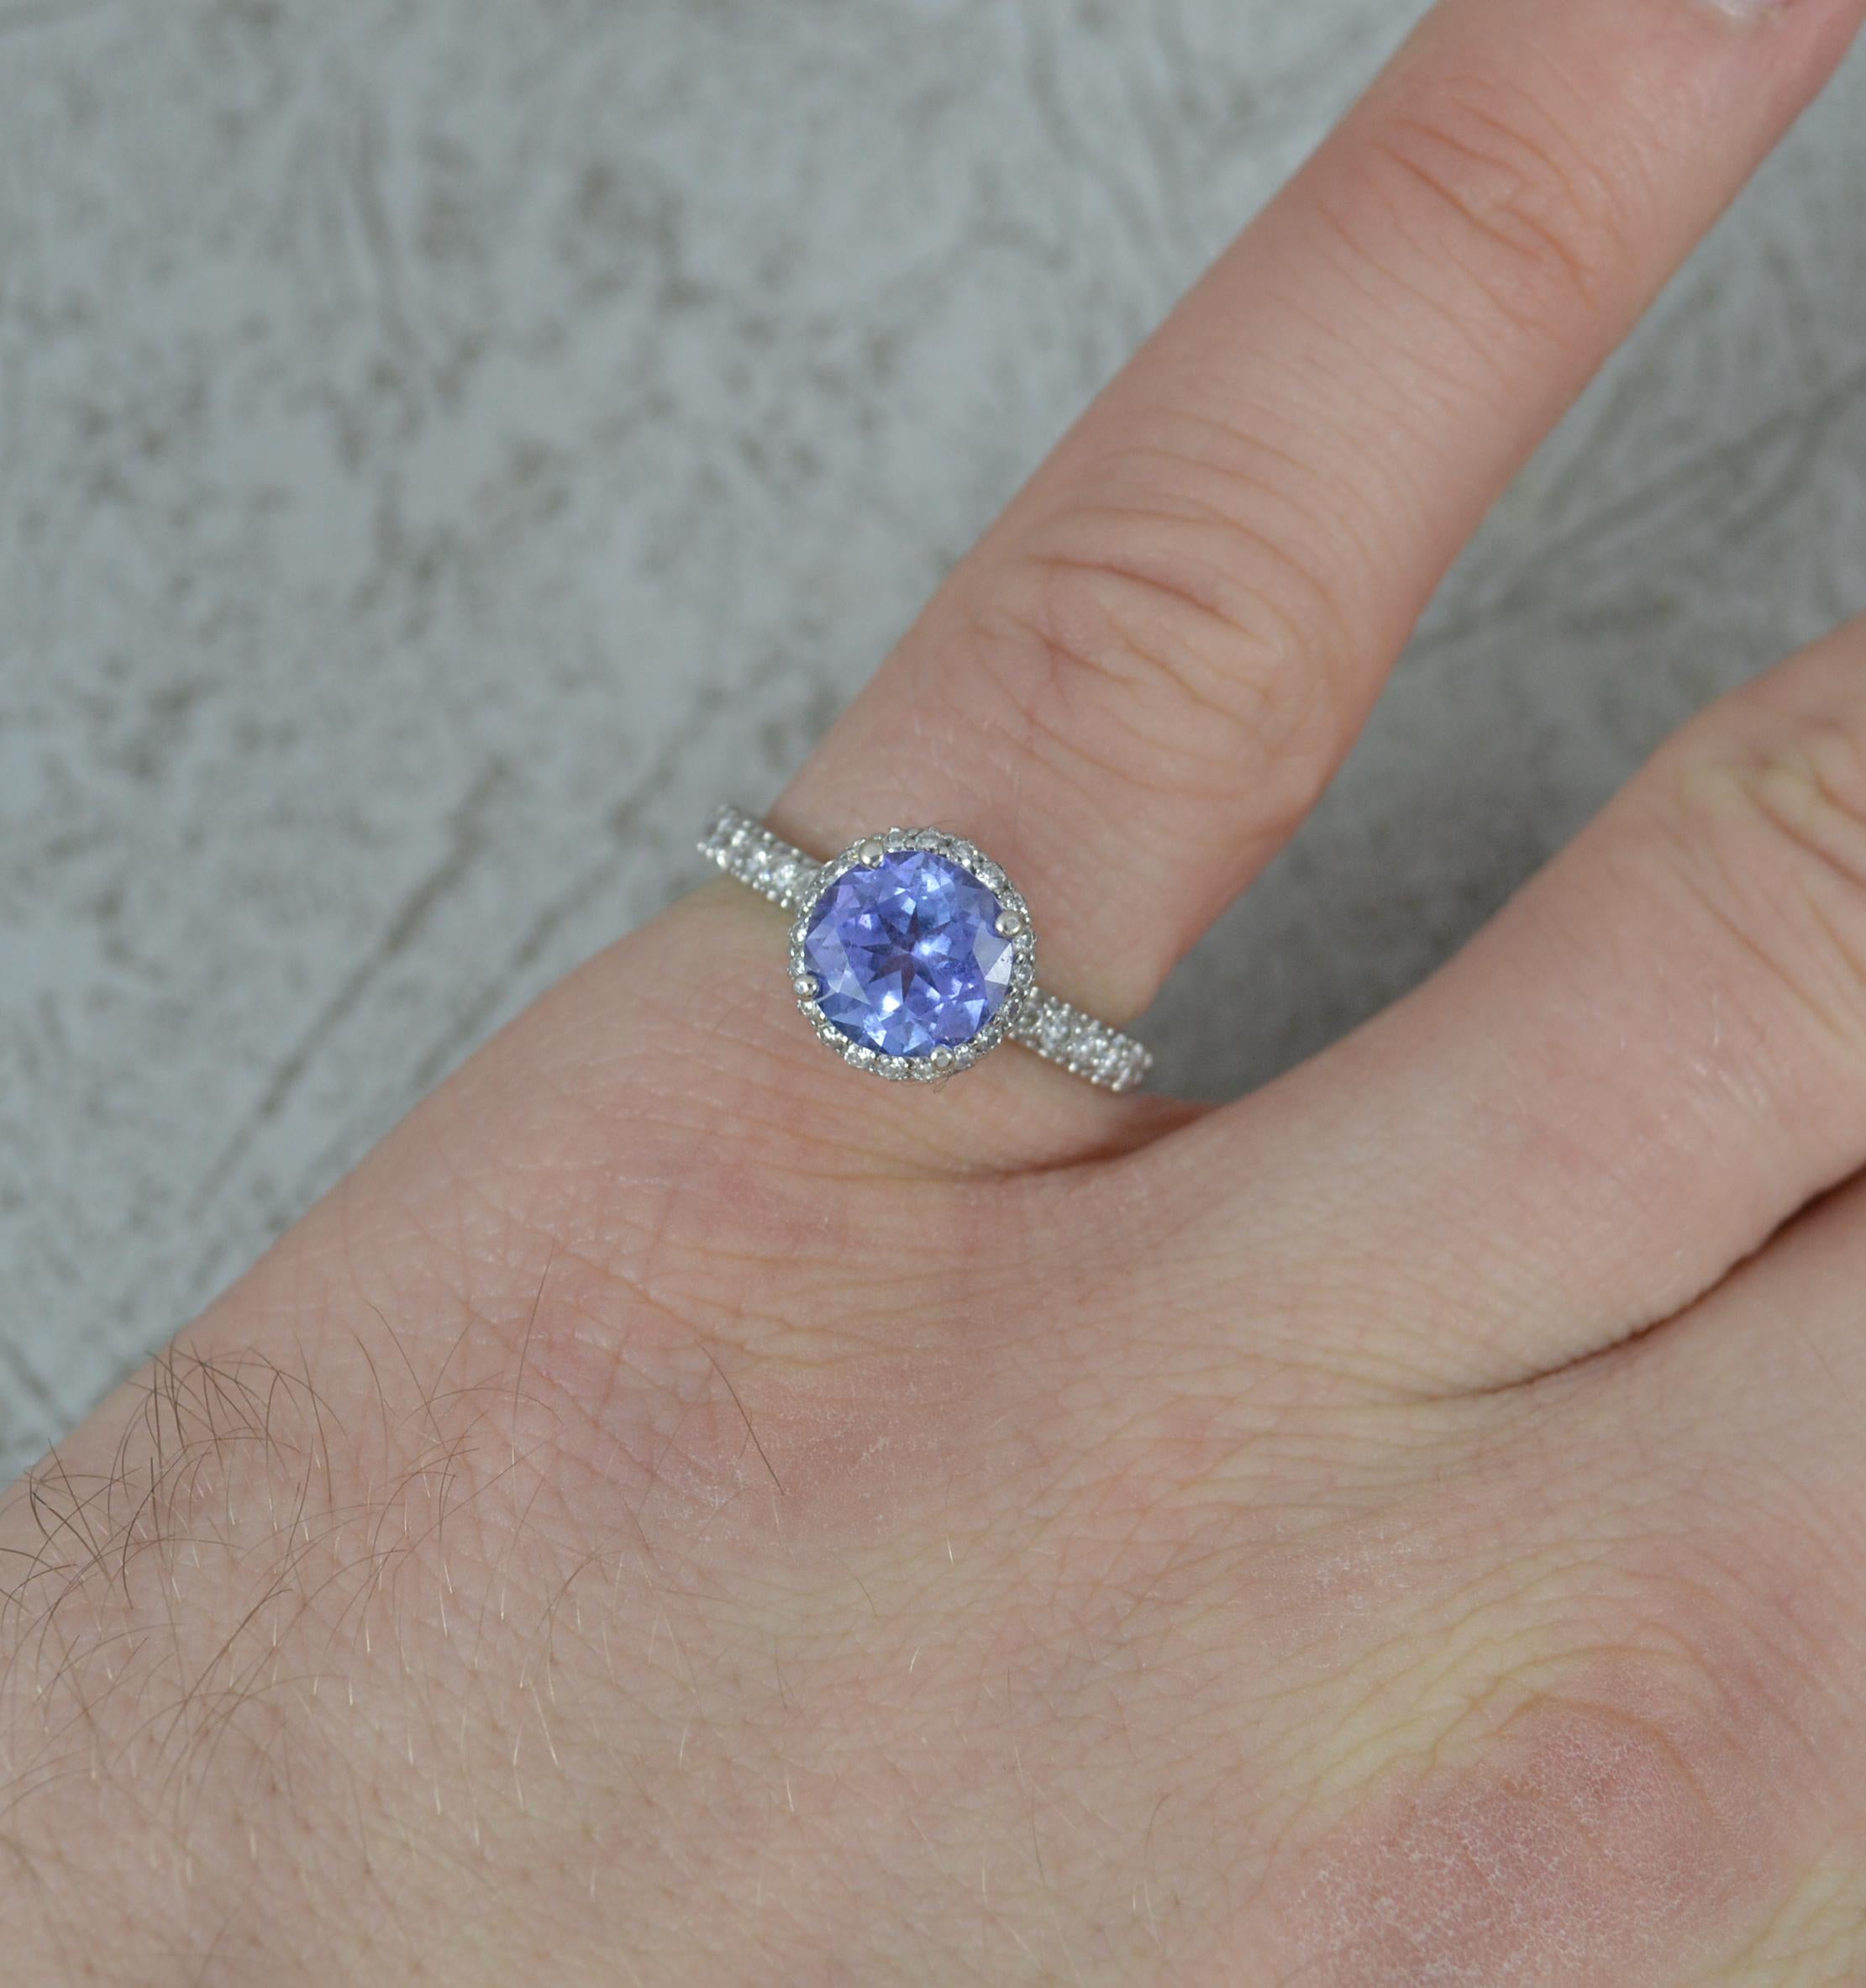 A wonderful halo engagement ring.
Solid 18 carat white gold example. Full of engraving throughout.
Set with a round cut tanzanite to centre, 7.4mm diameter. 
Further round brilliant cut diamonds to the head and shoulders. To total 0.75 carats